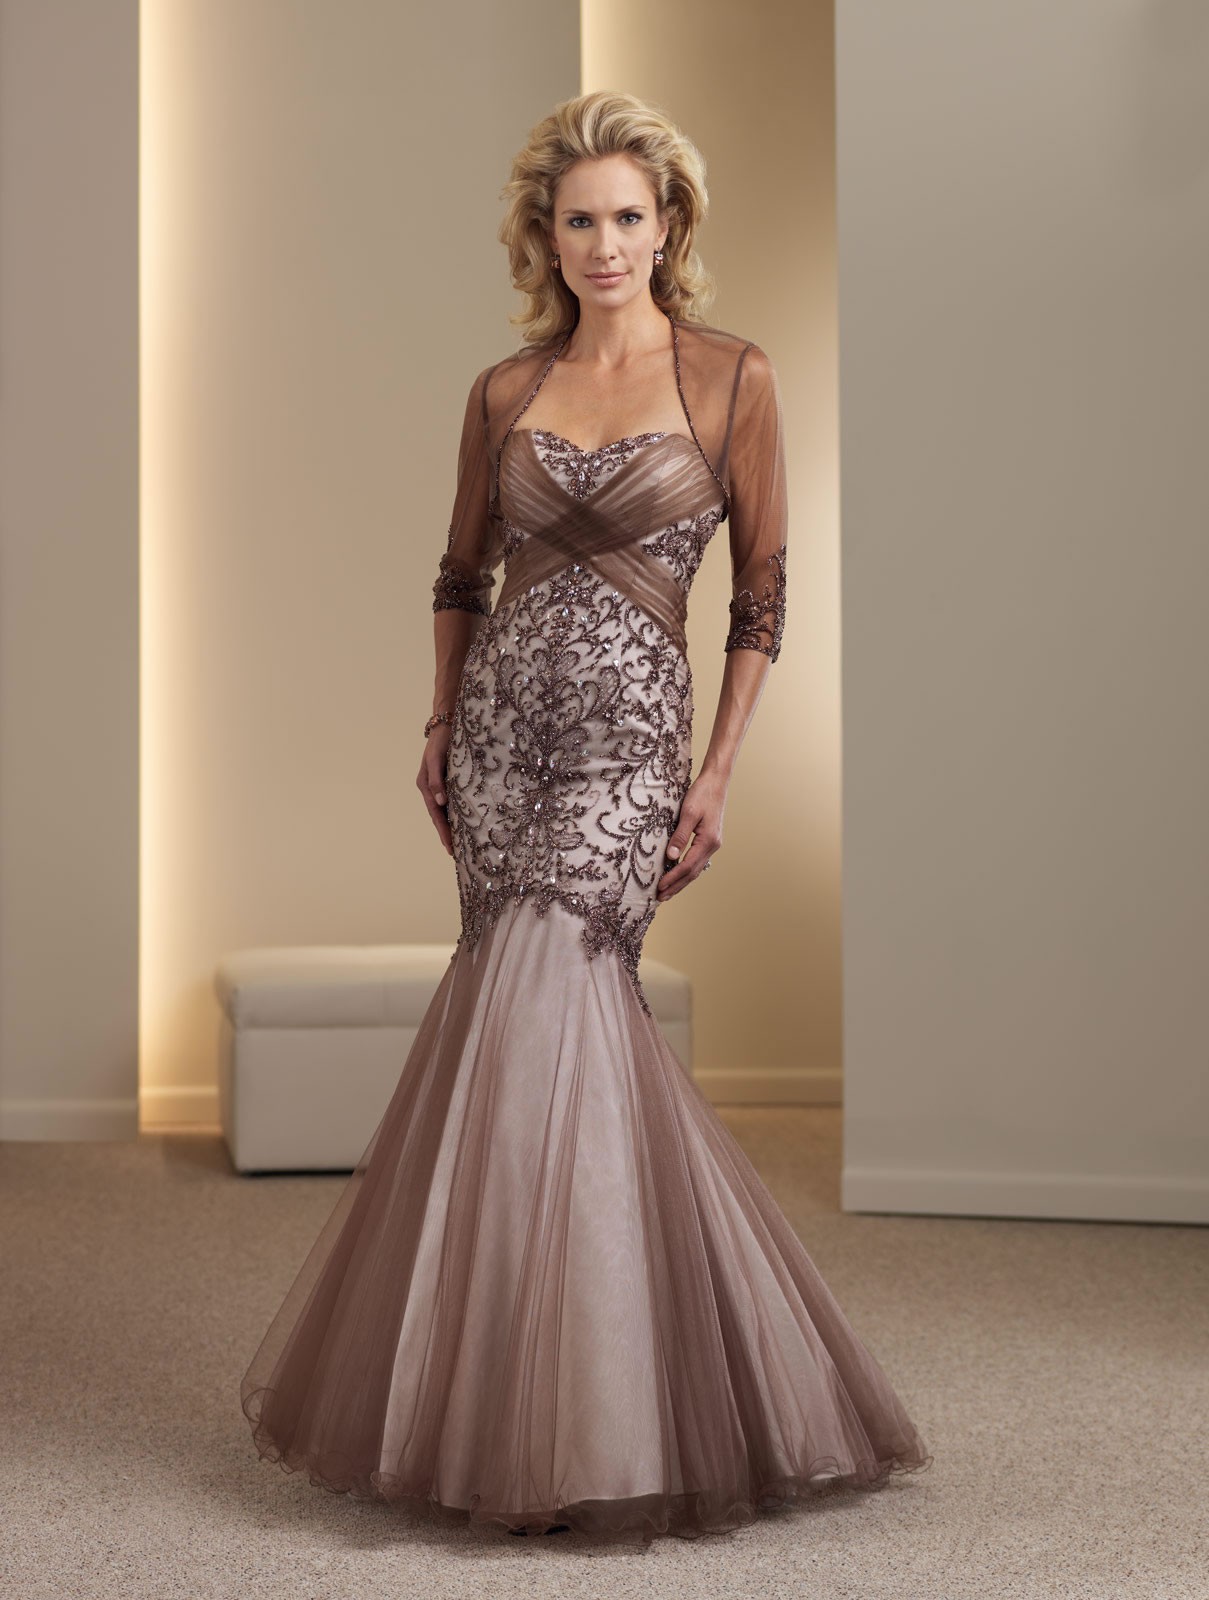 Wedding Dress For The Mother Of The Bride